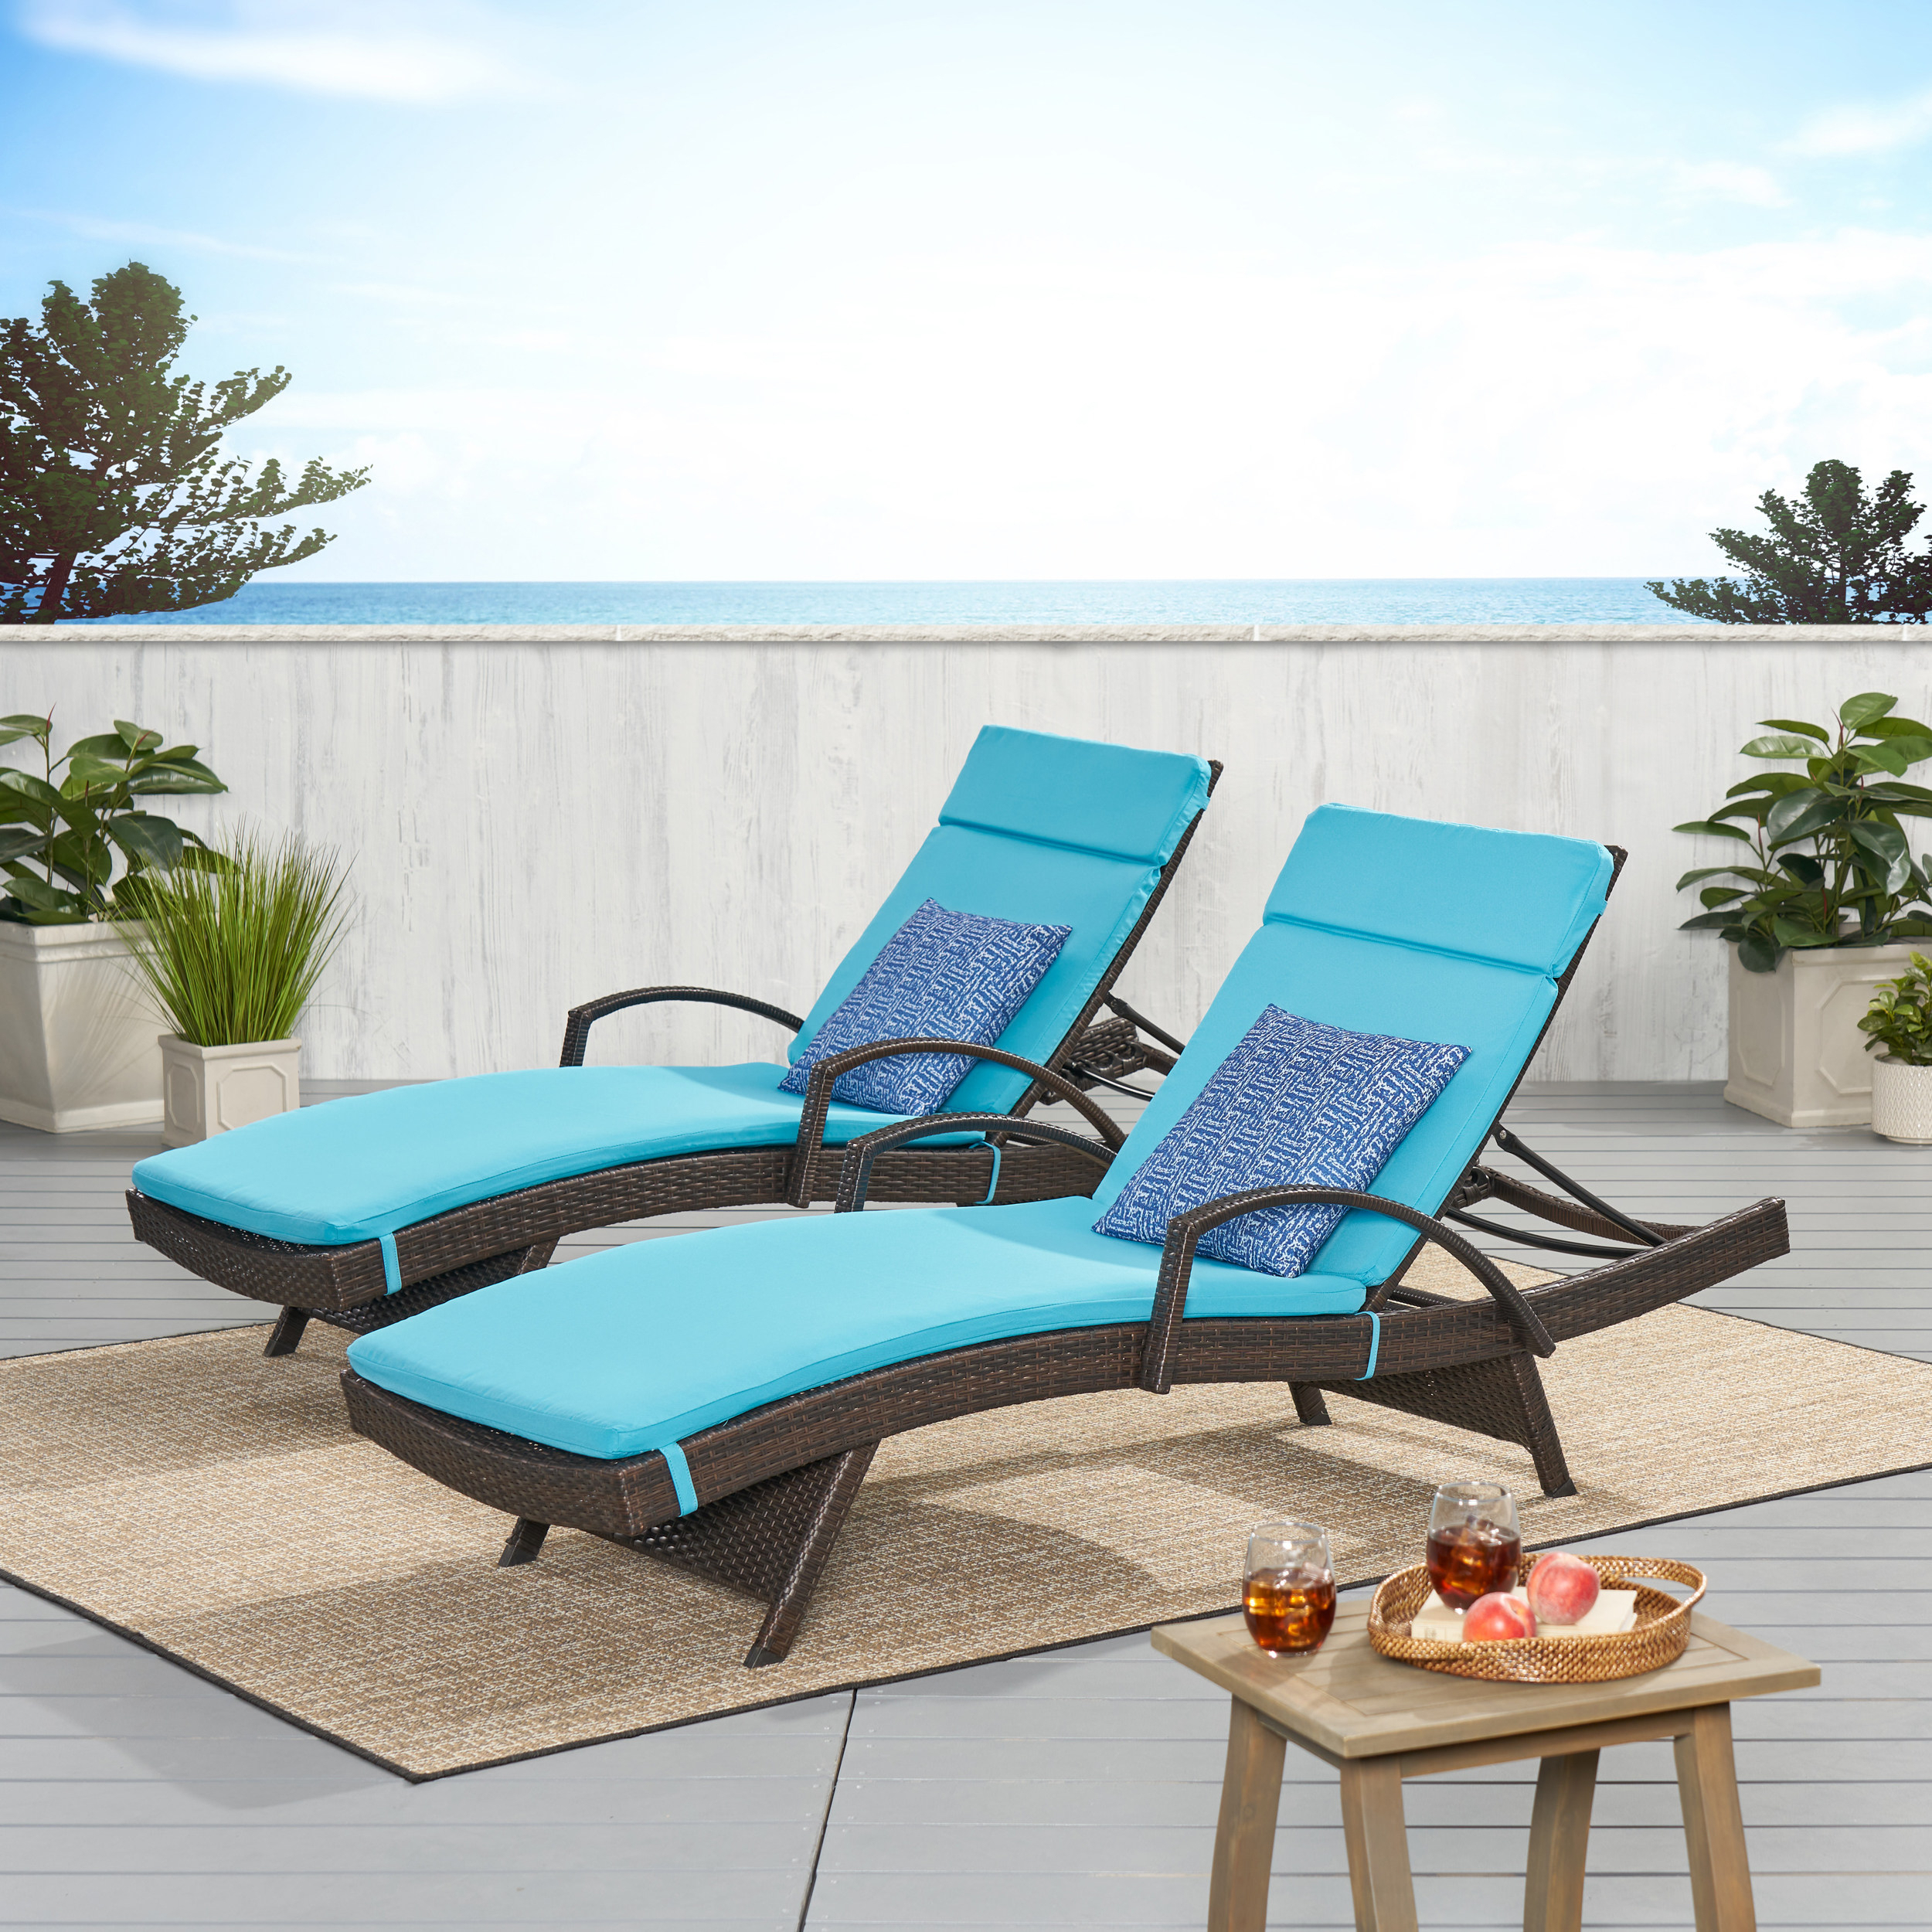 Lakeport Outdoor Wicker Armed Chaise Lounge Chairs With Cushions (set Of 2) - Blue Cushion